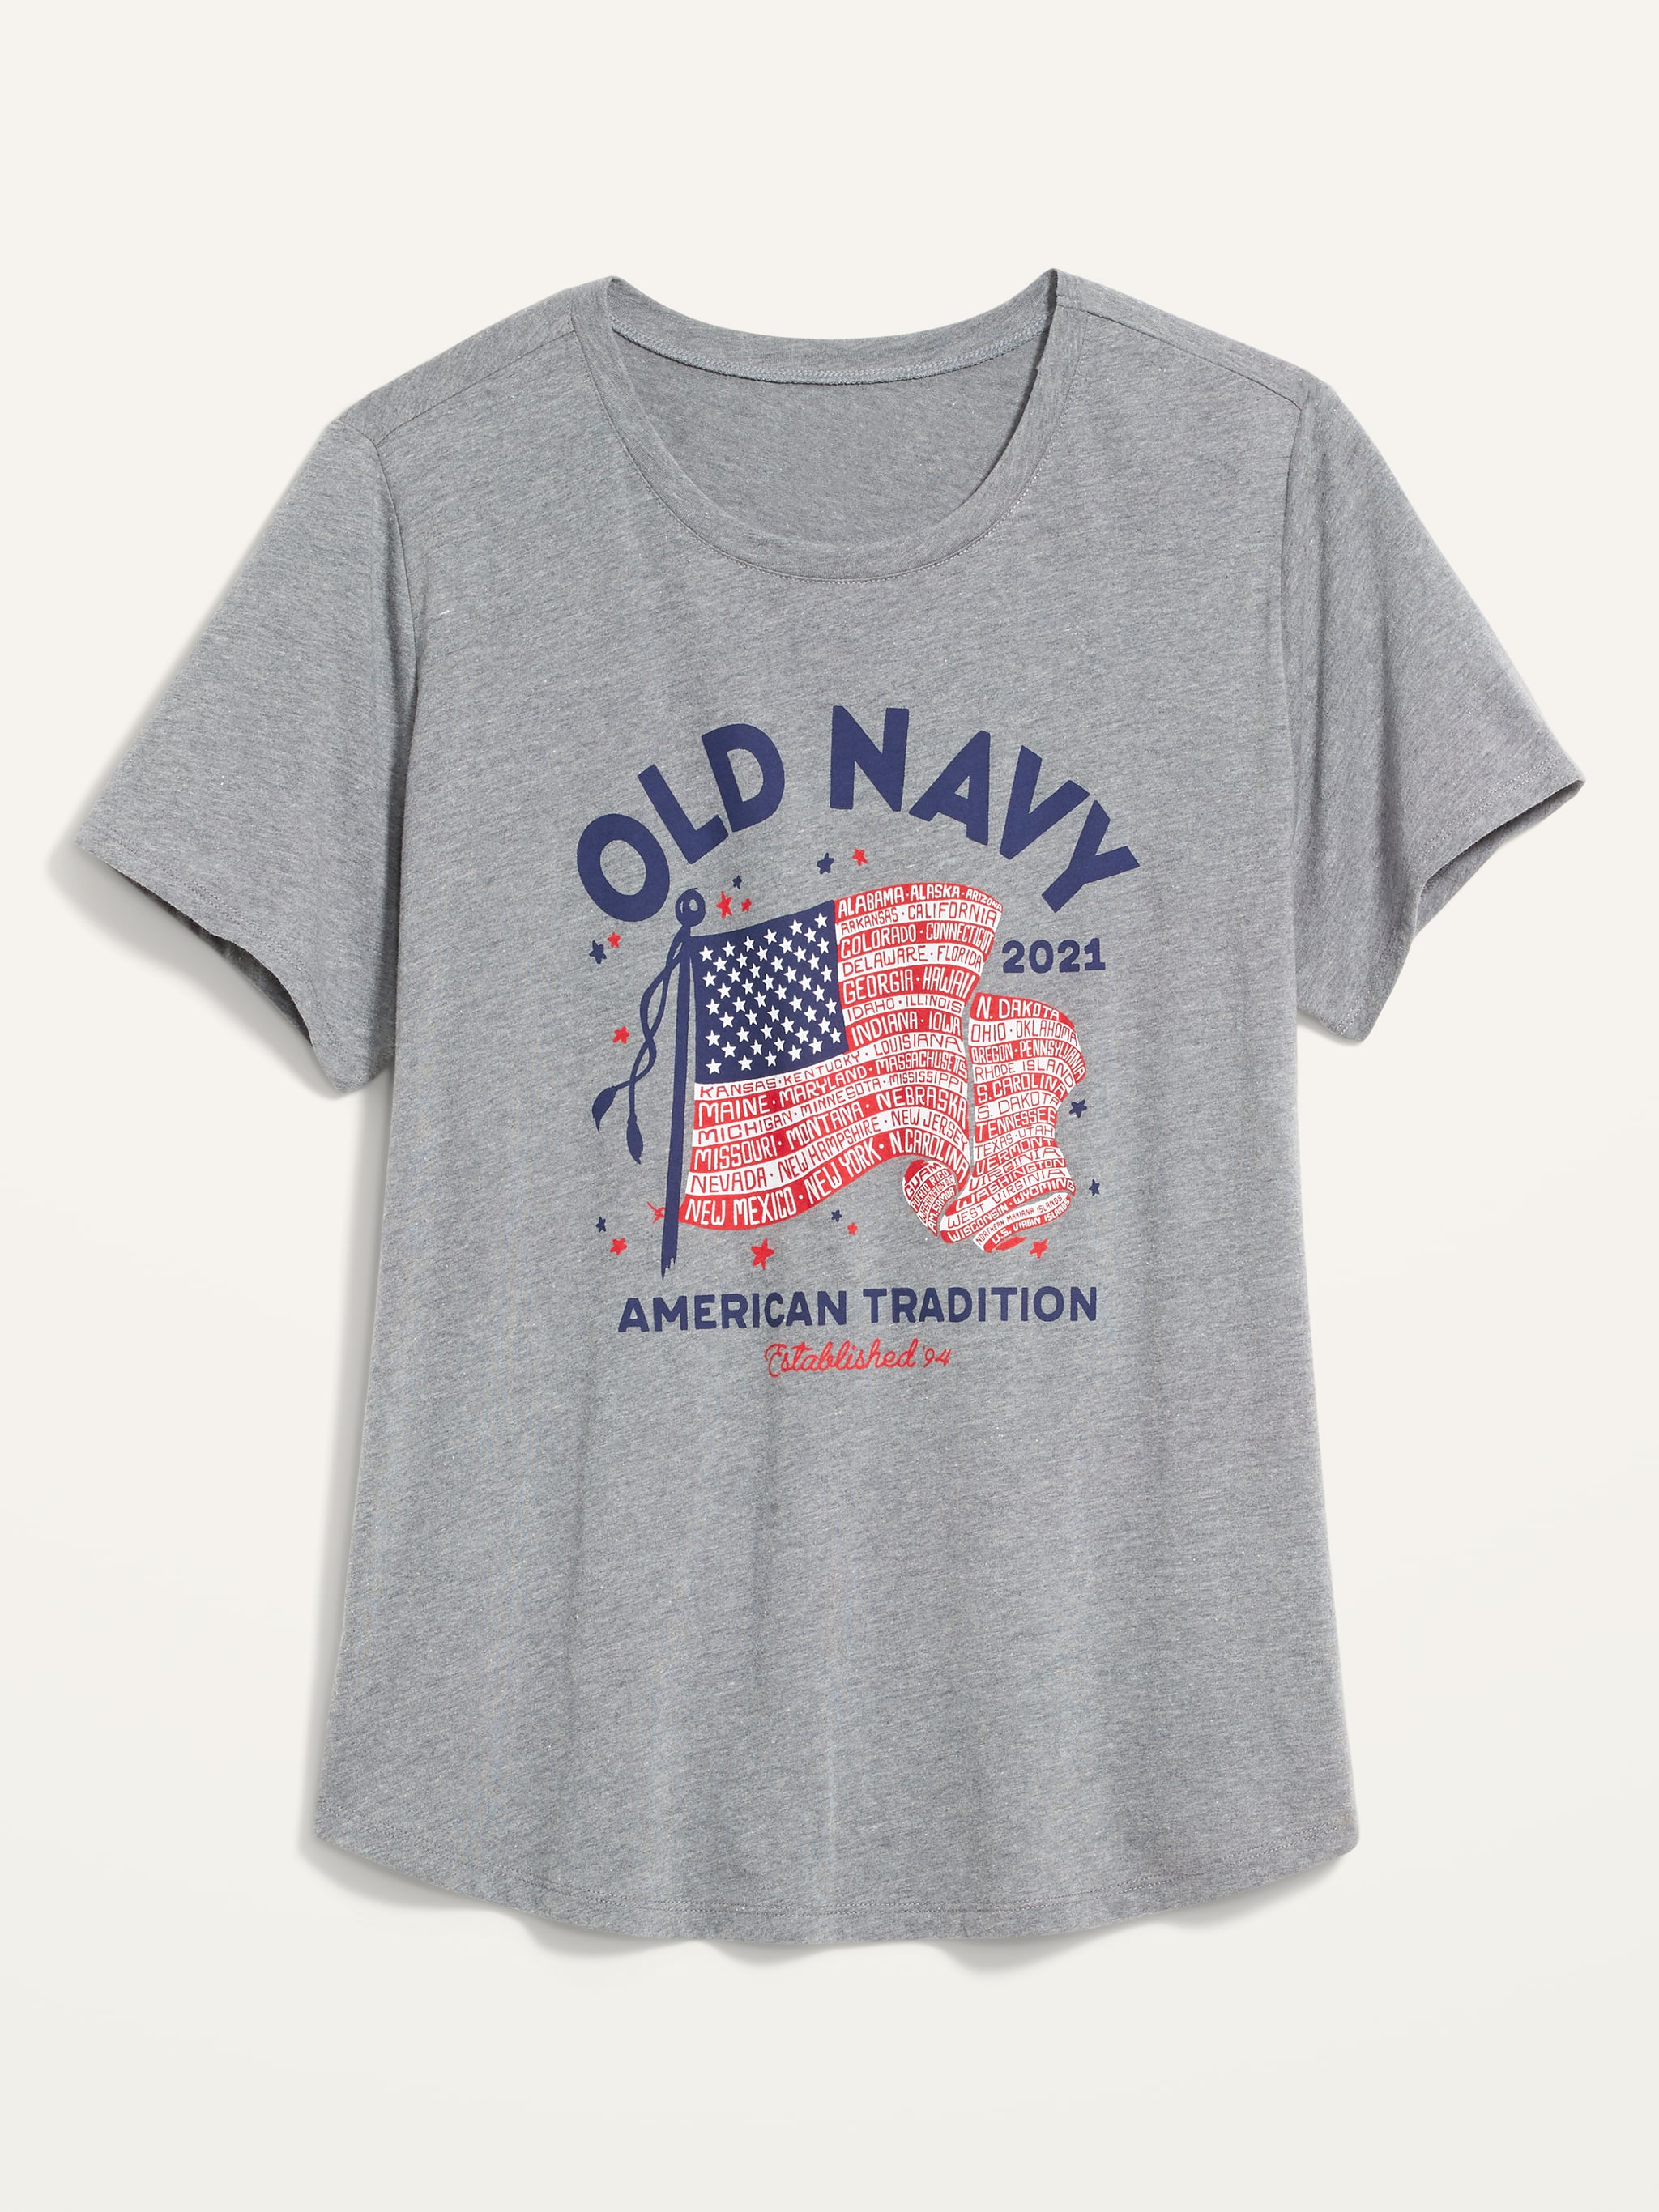 Old Navy's 2021 Flag Tees Celebrate New American Citizens POPSUGAR